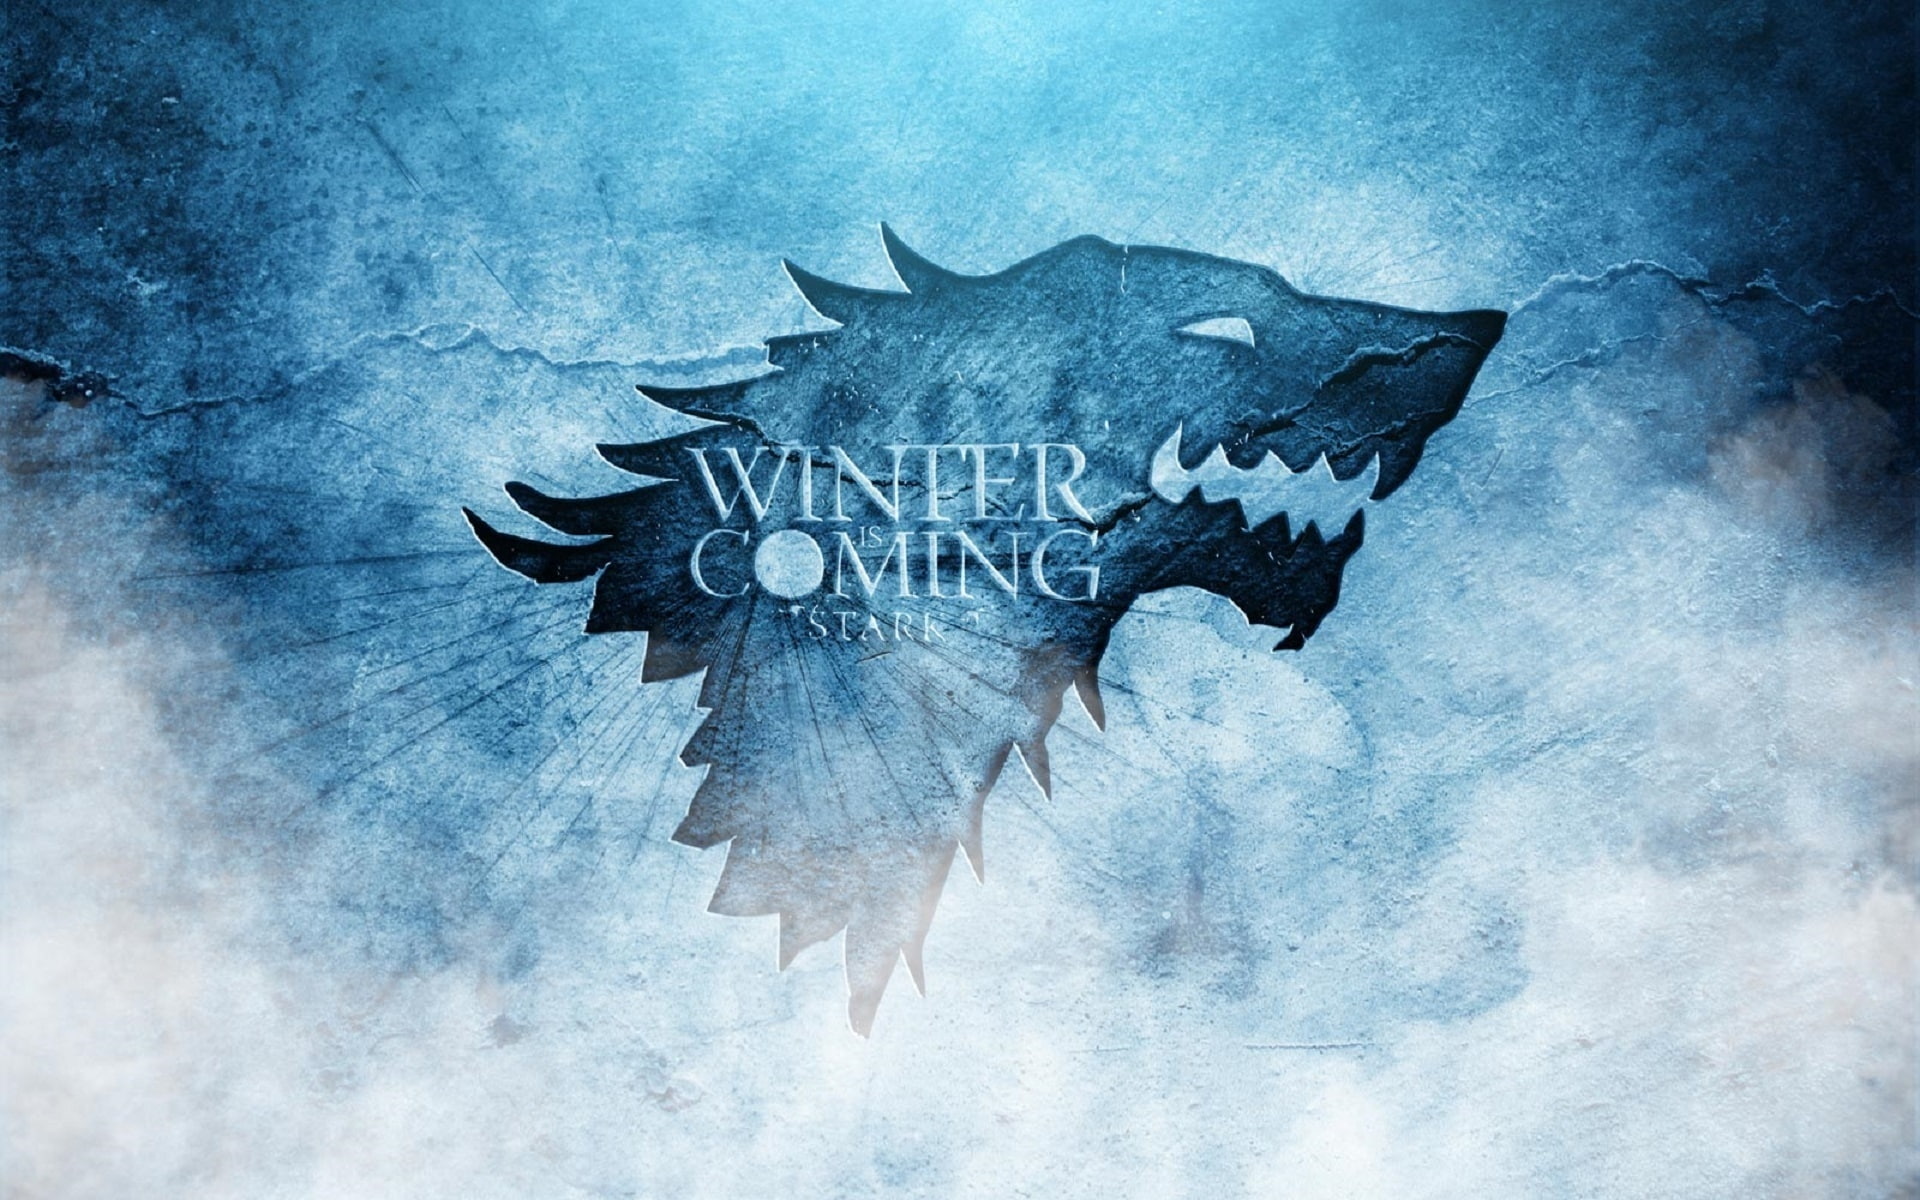 Game of Thrones the Song of Ice and Fire, winter is coming game of thrones